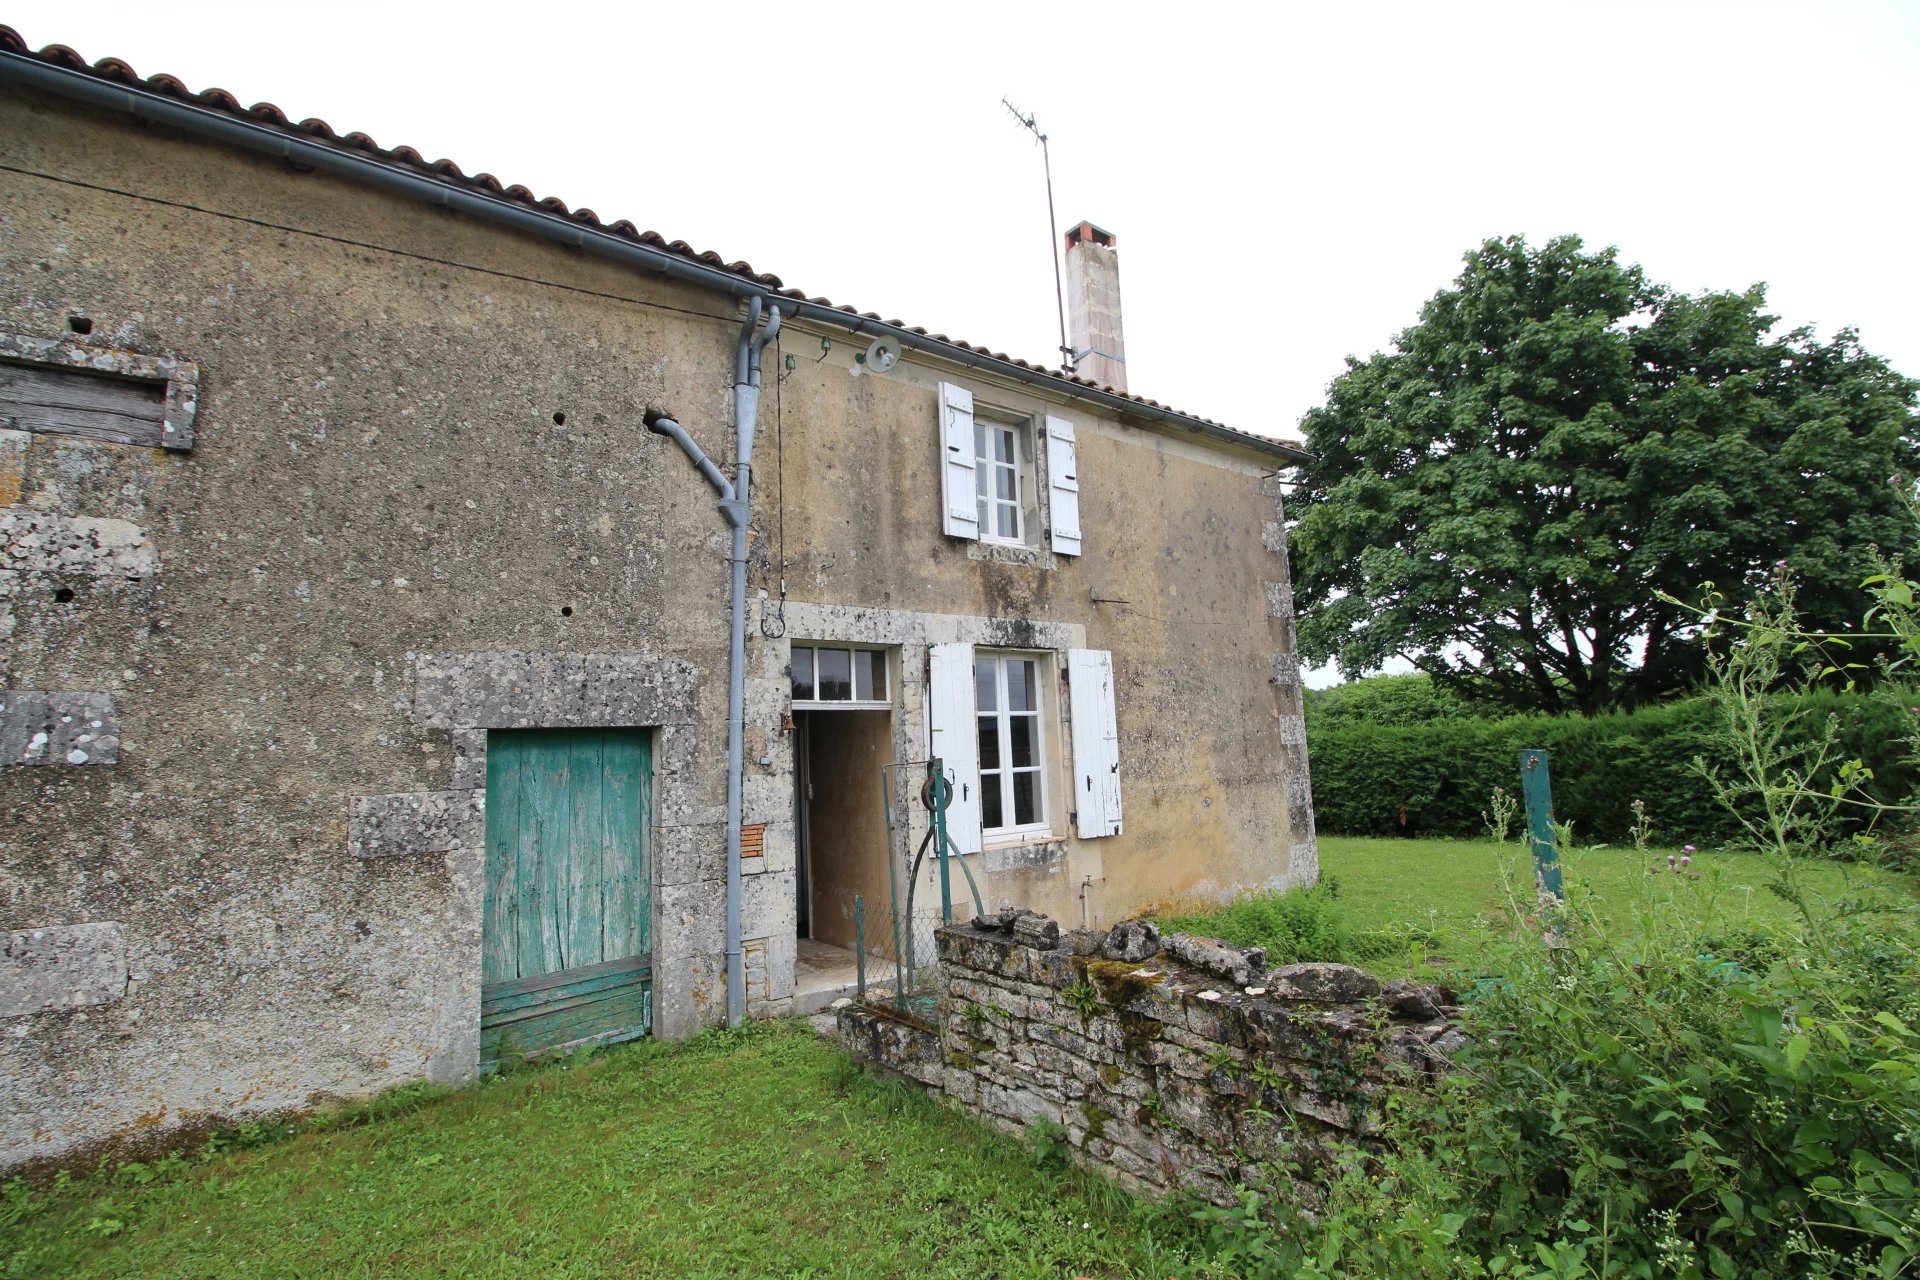 One bedroom detached house close to the popular chateau town of Verteuil-sur-Charente